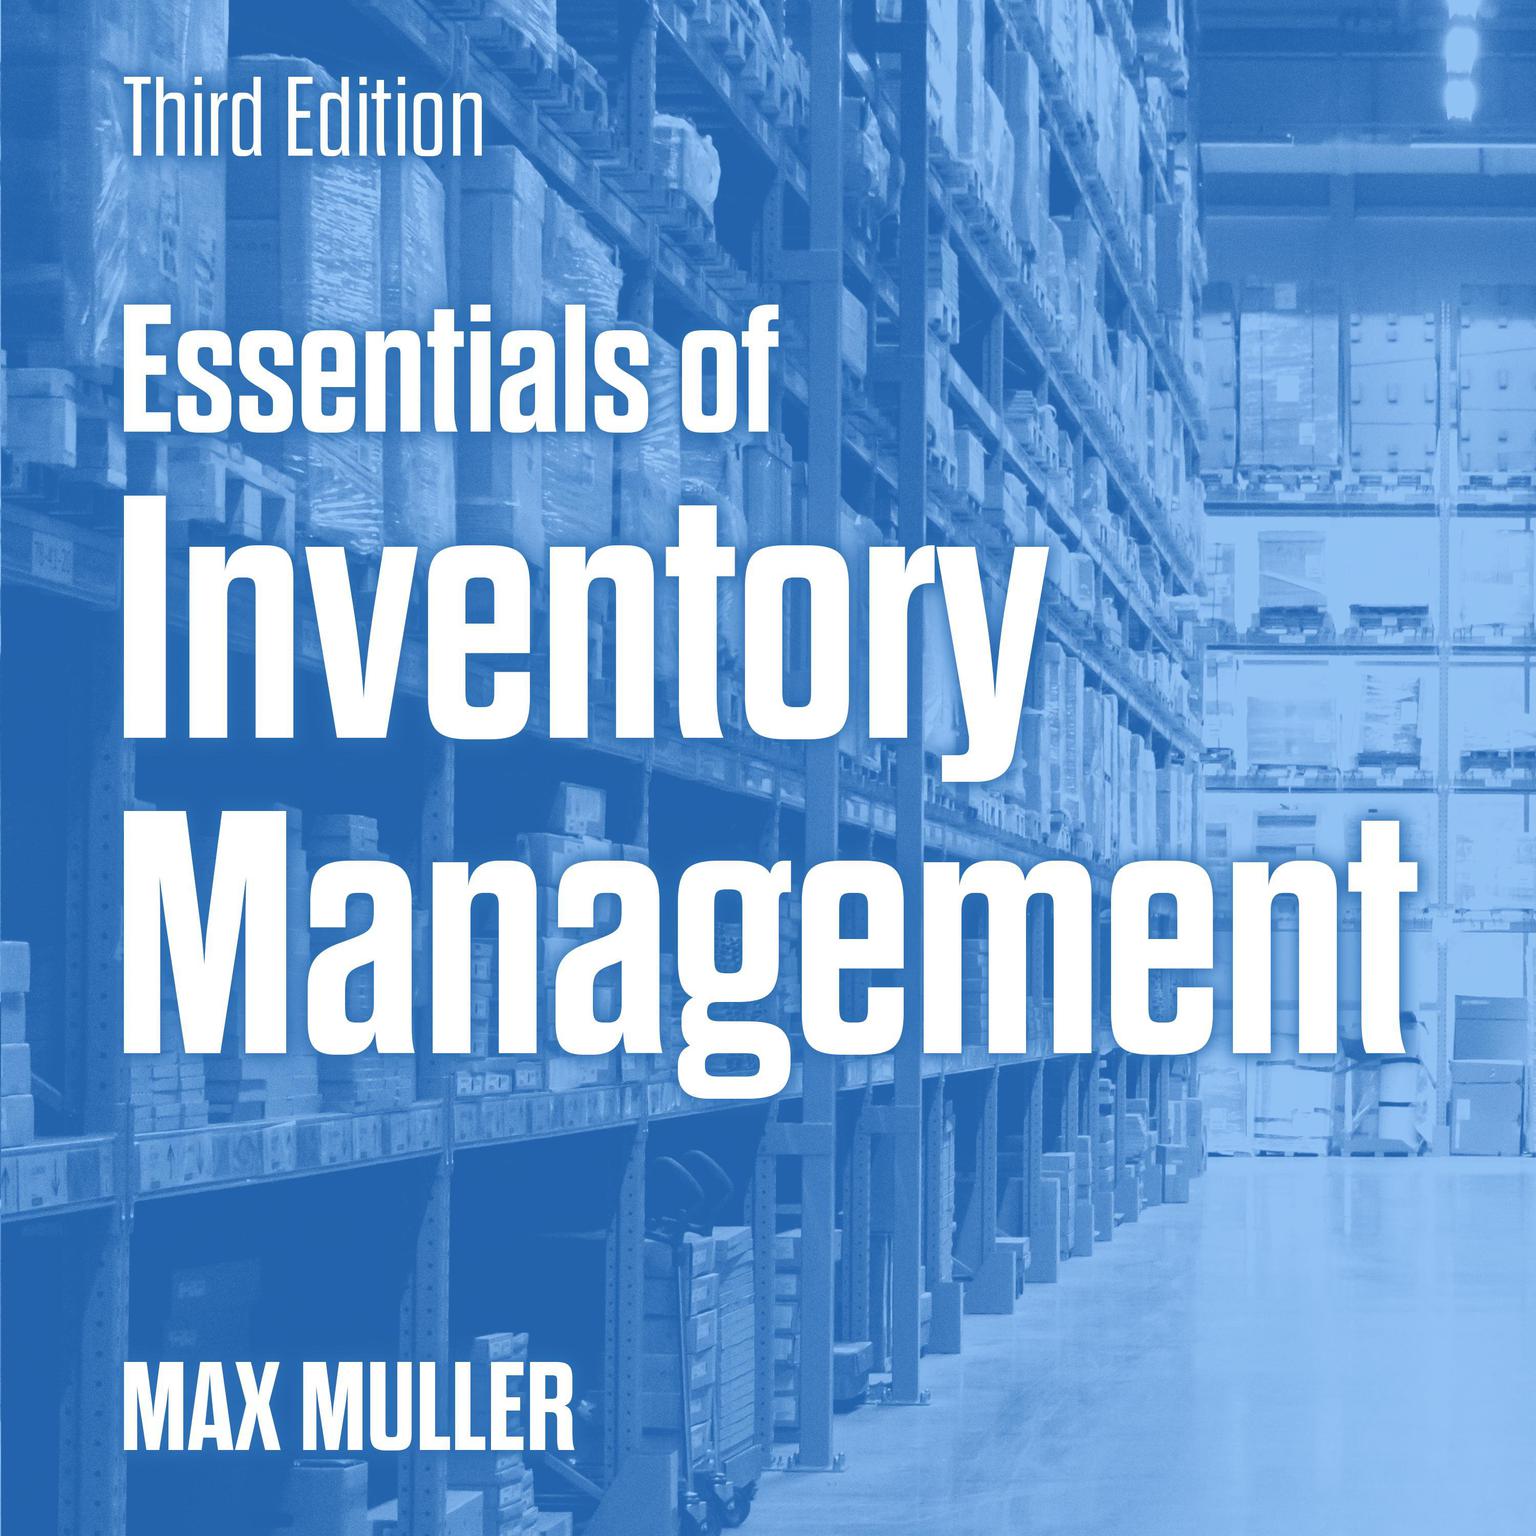 Essentials of Inventory Management: Third Edition Audiobook, by Max Muller